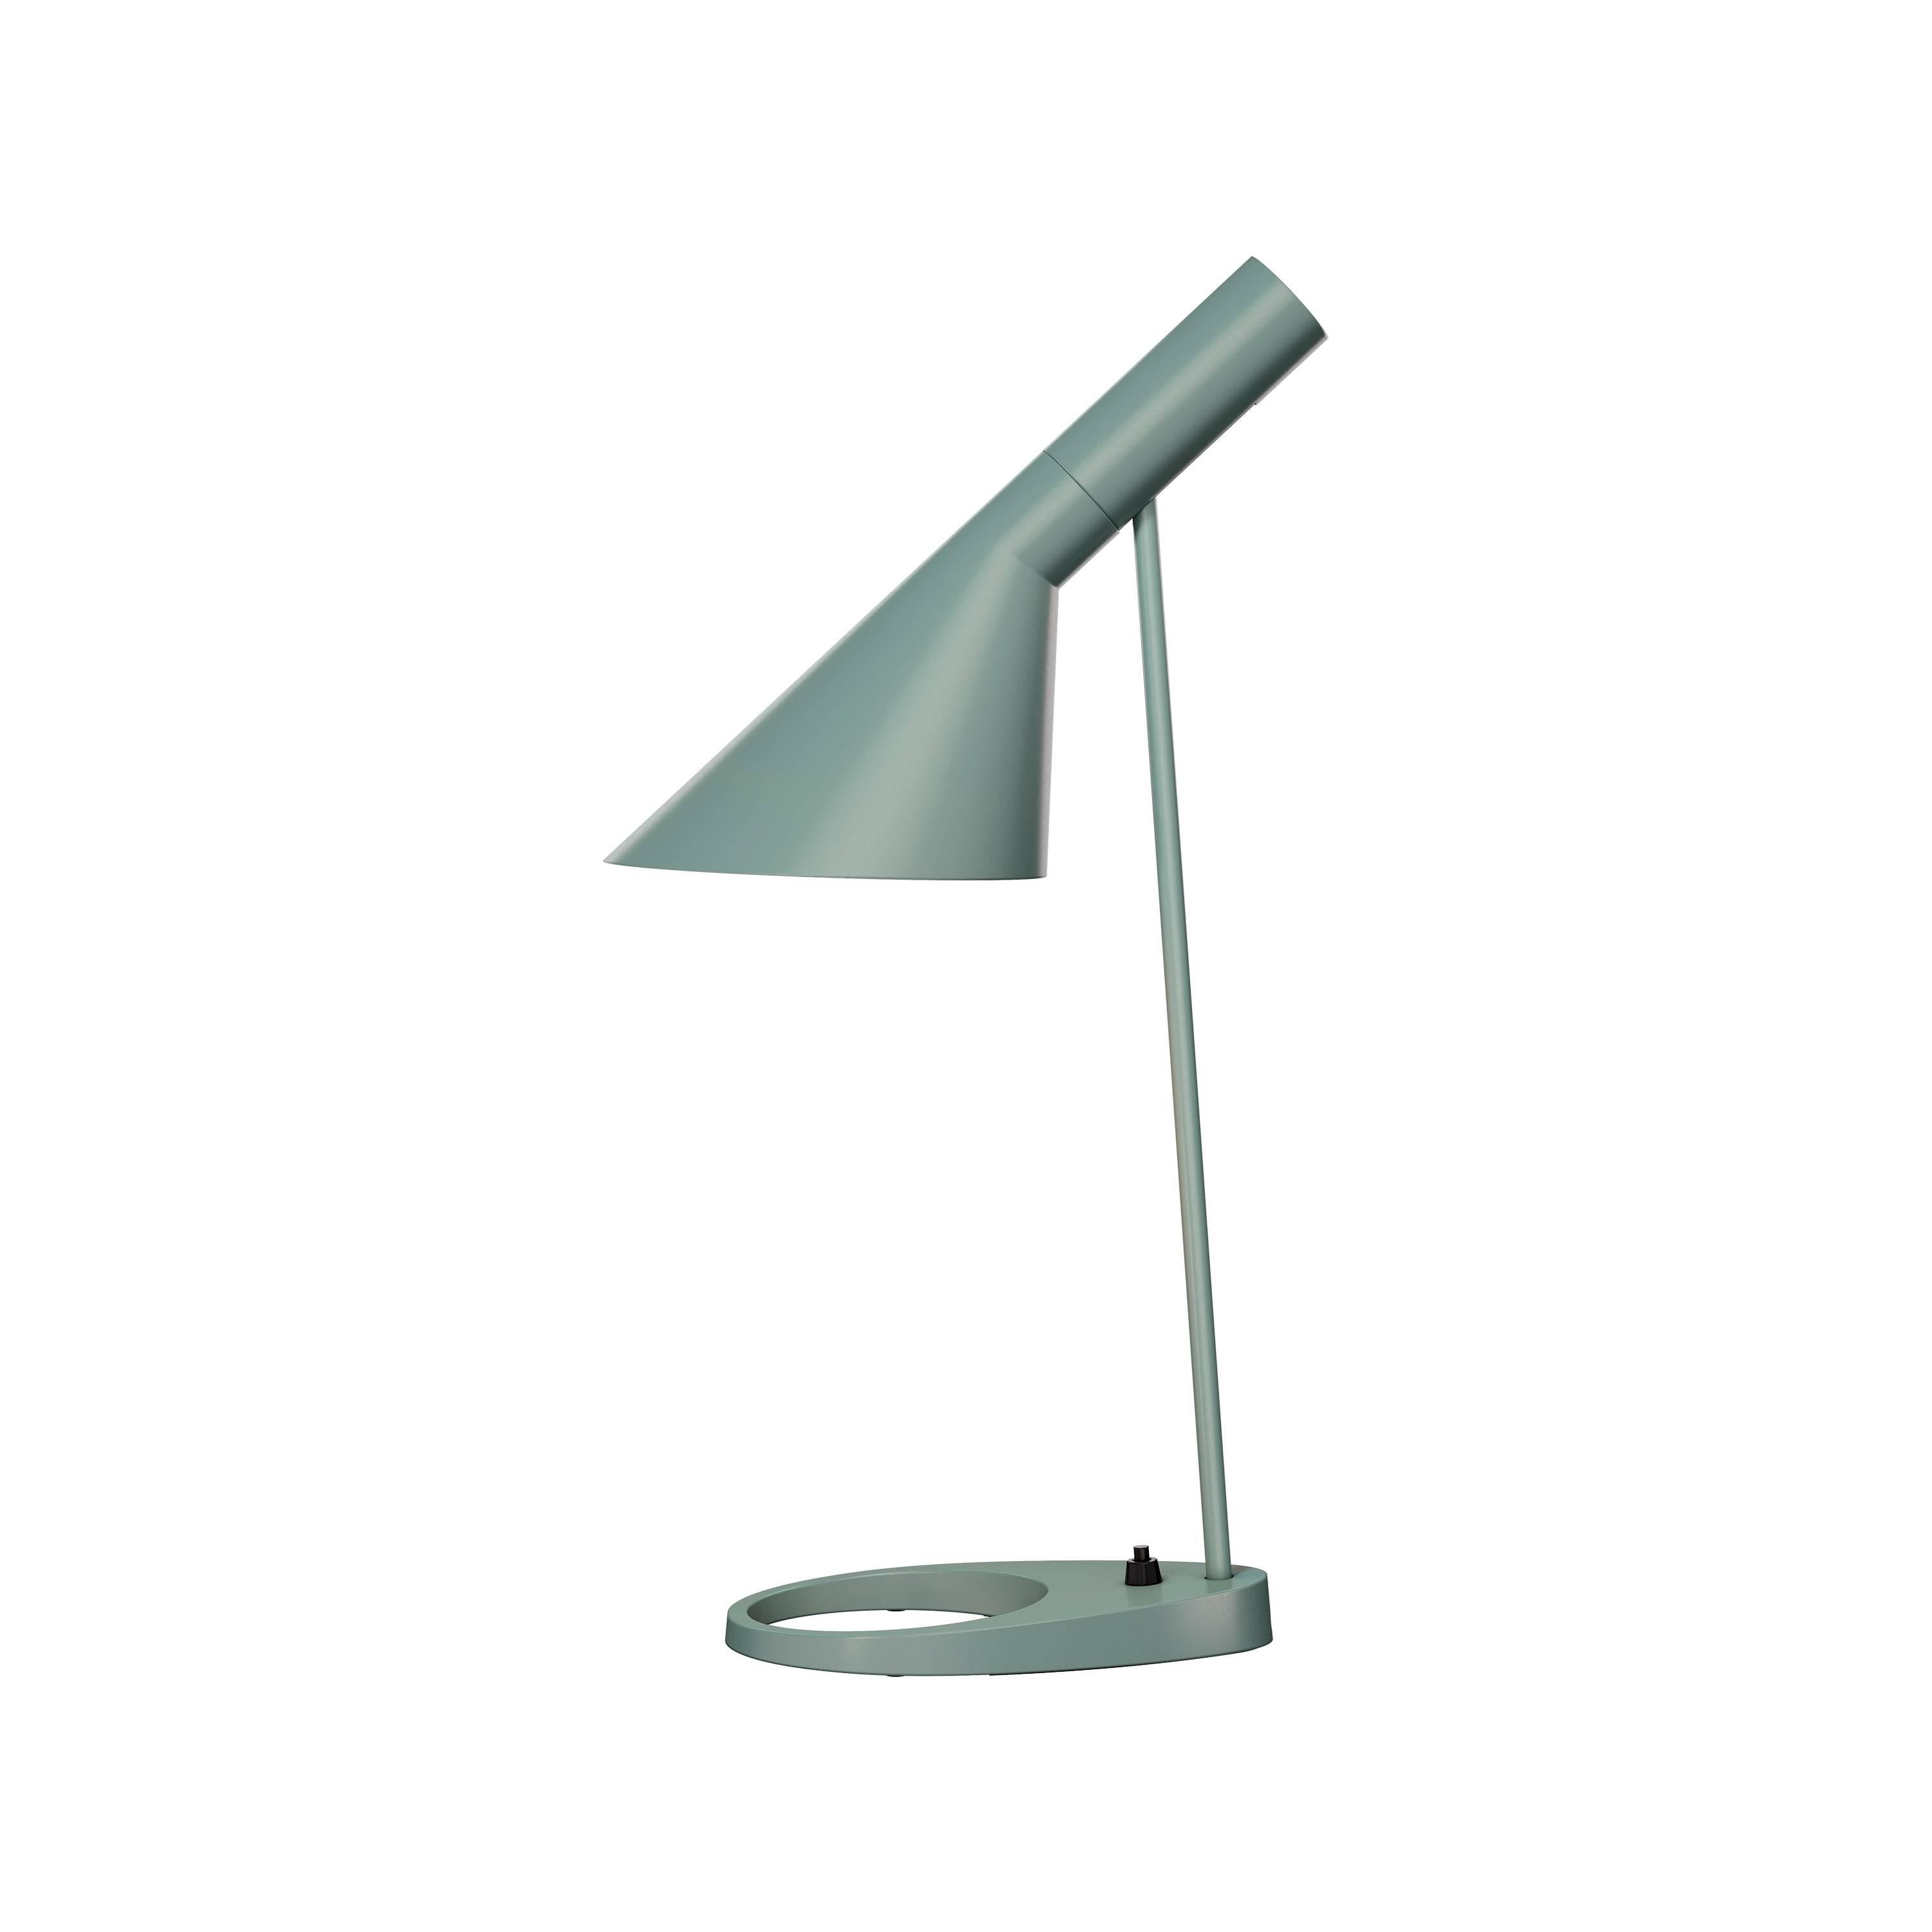 Arne Jacobsen AJ Table Lamp in Stainless Steel for Louis Poulsen In New Condition For Sale In Glendale, CA